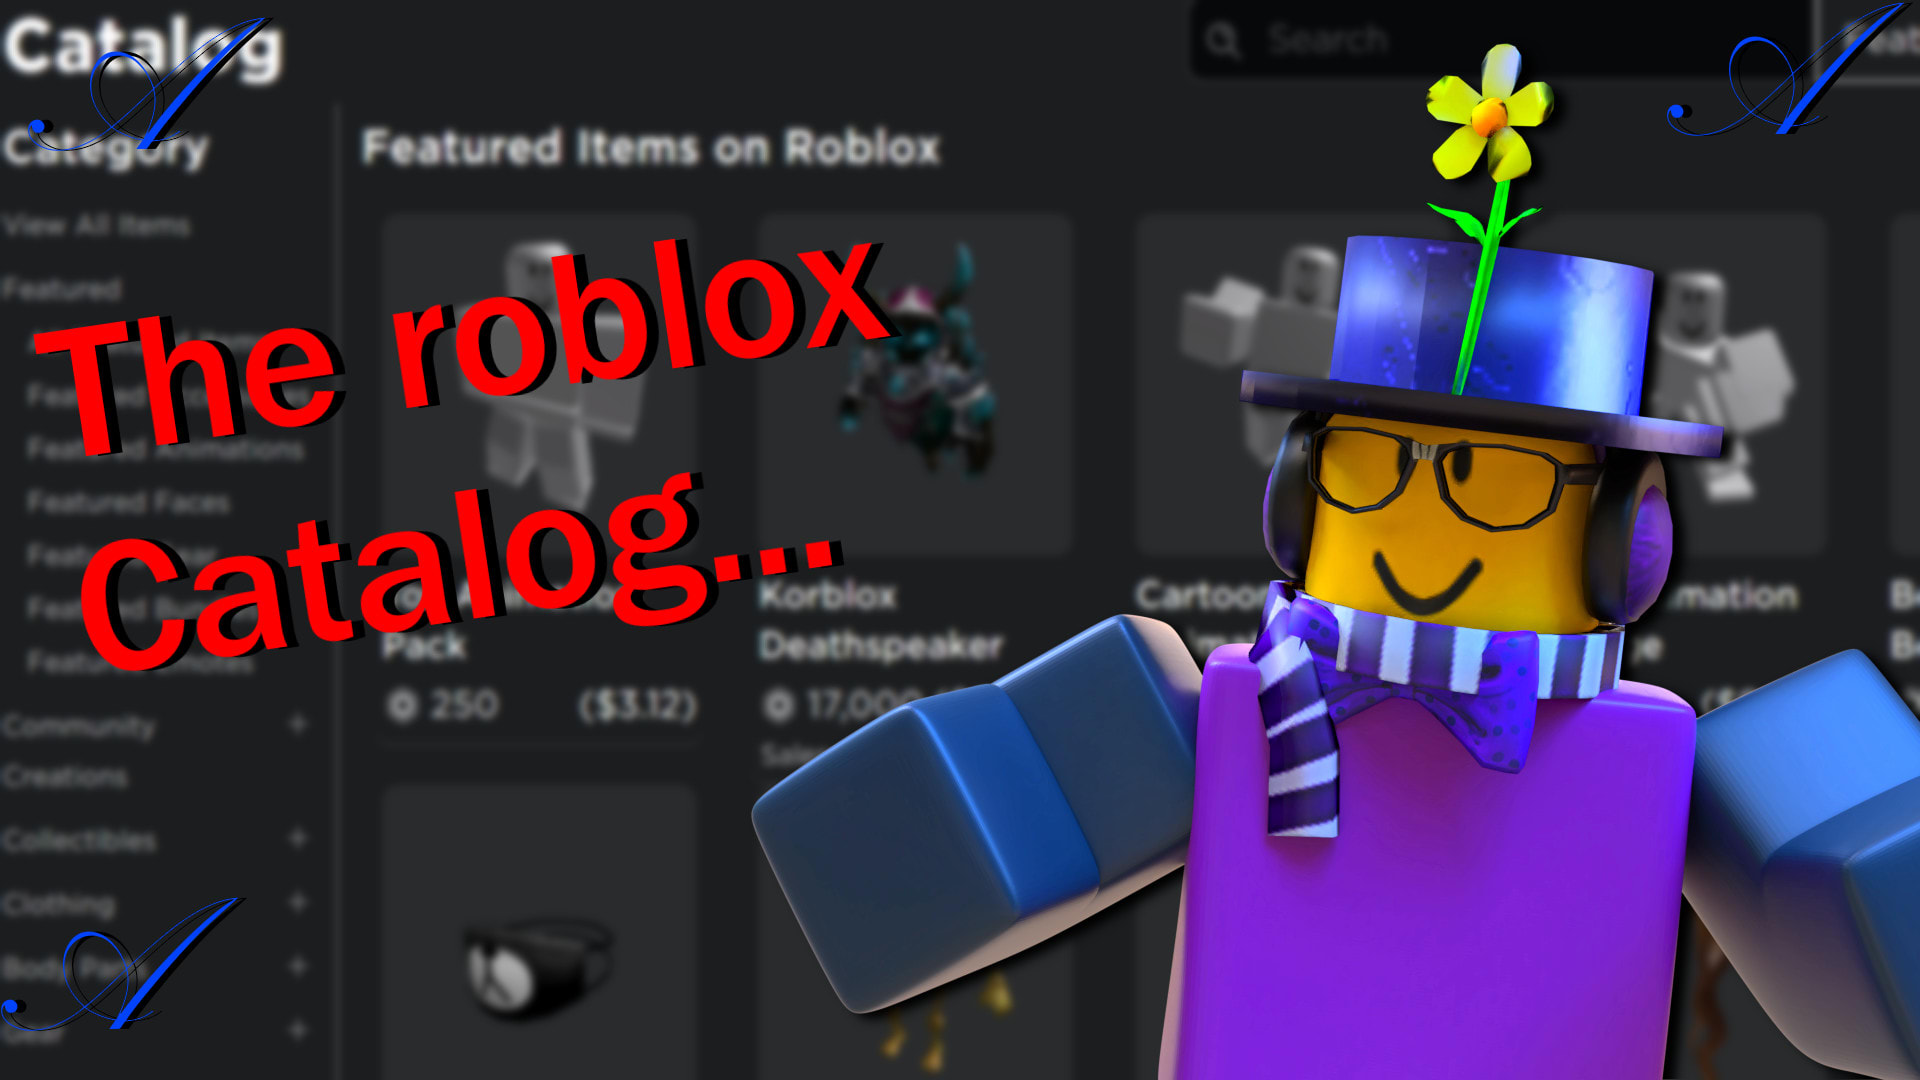 Make You A High Quality Roblox Gfx By Alexmehic123 - roblox discord profile picture for myself by